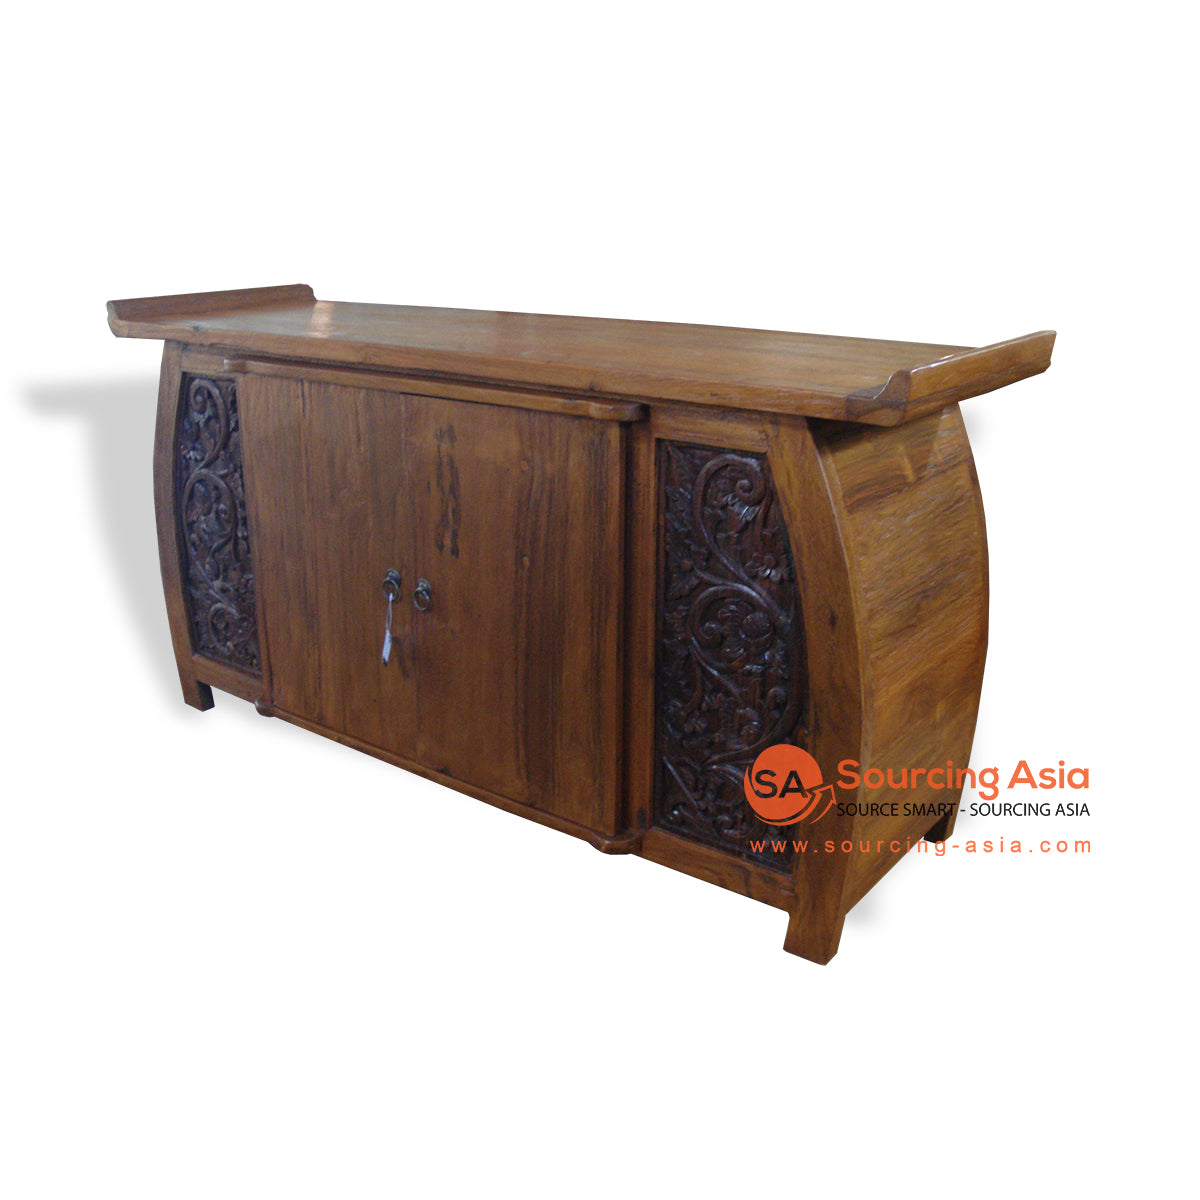 KYT20012 NATURAL RECYCLED TEAK WOOD TWO DOORS ROUNDED ENDS BUFFET WITH CARVING